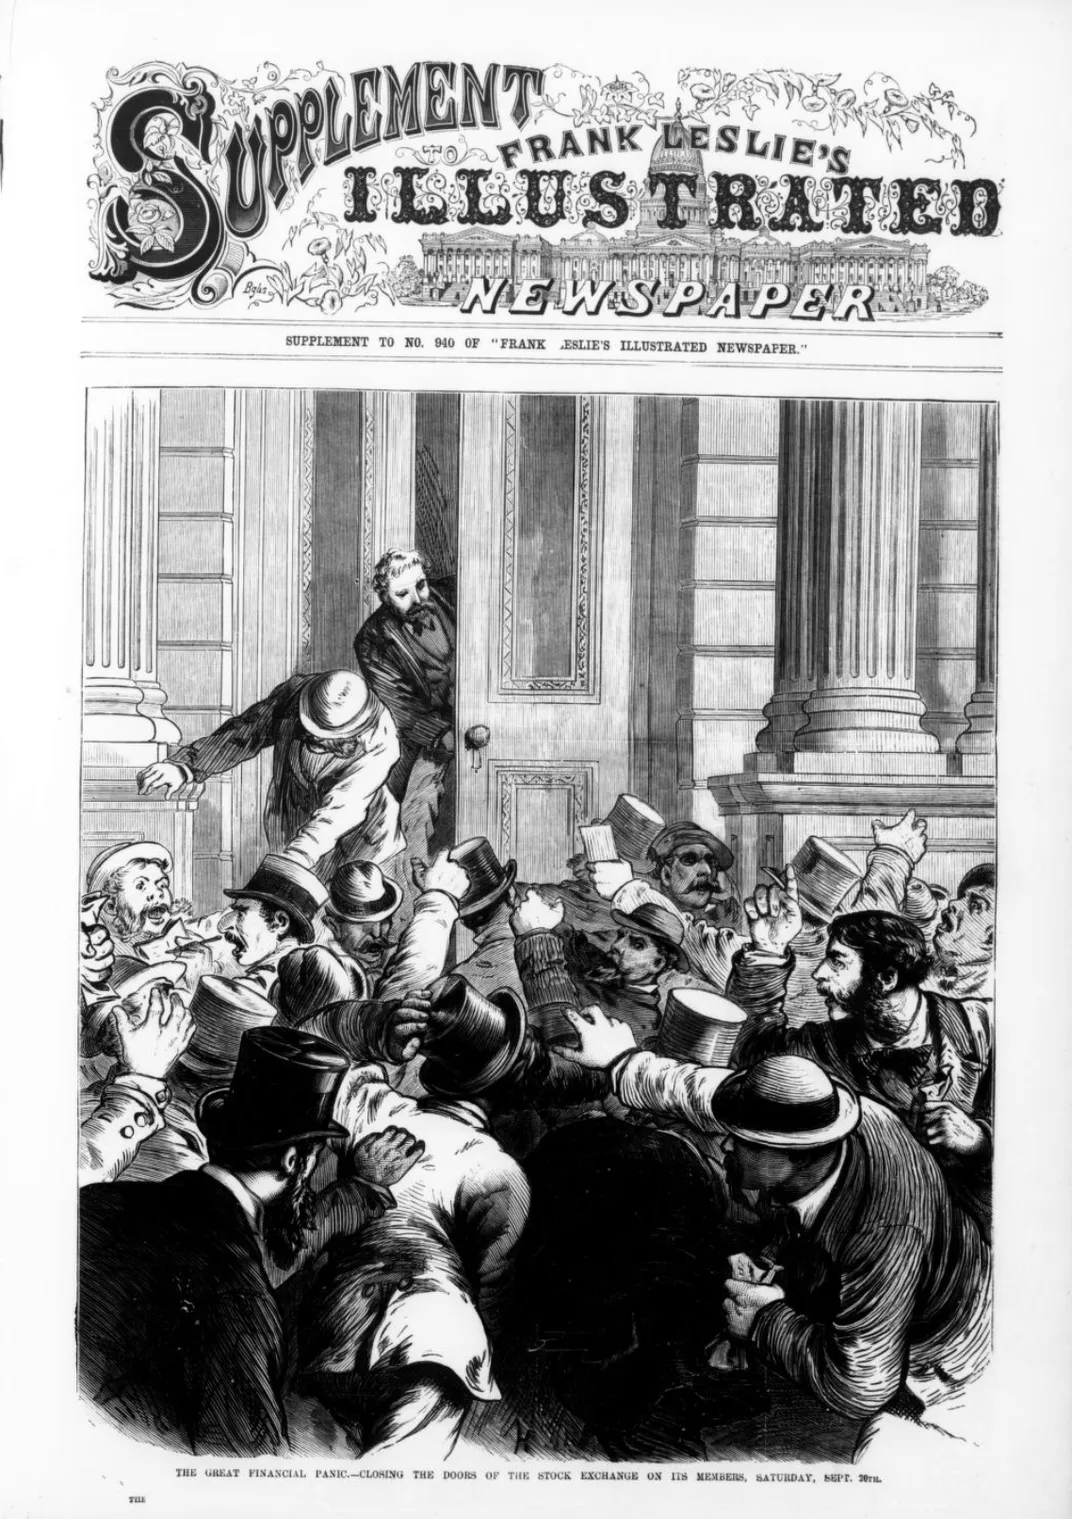 An illustration of the closing of the New York Stock Exchange doors on September 20